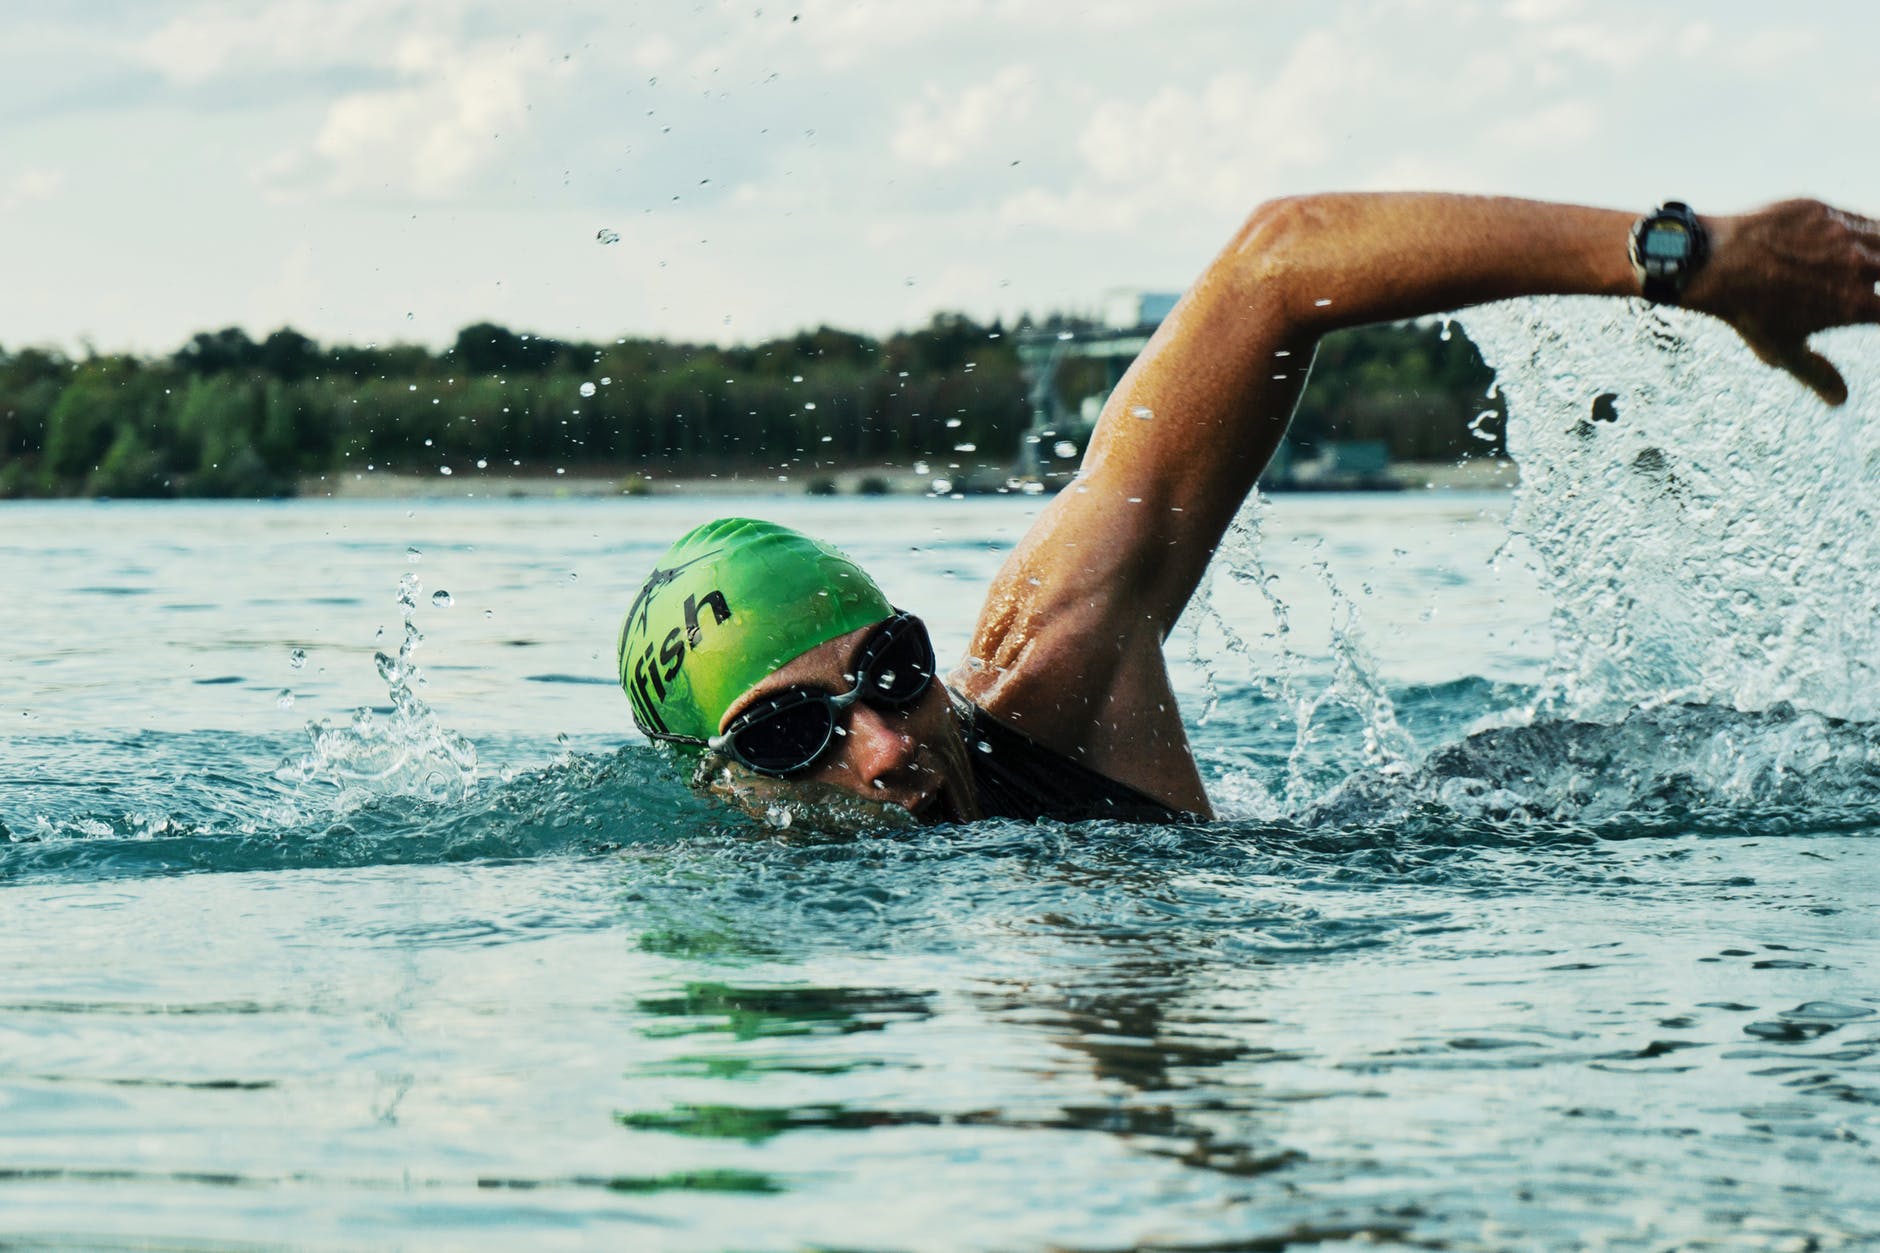 open-water-swimming-races-in-ireland-2019-8-of-the-best-outsider-ie